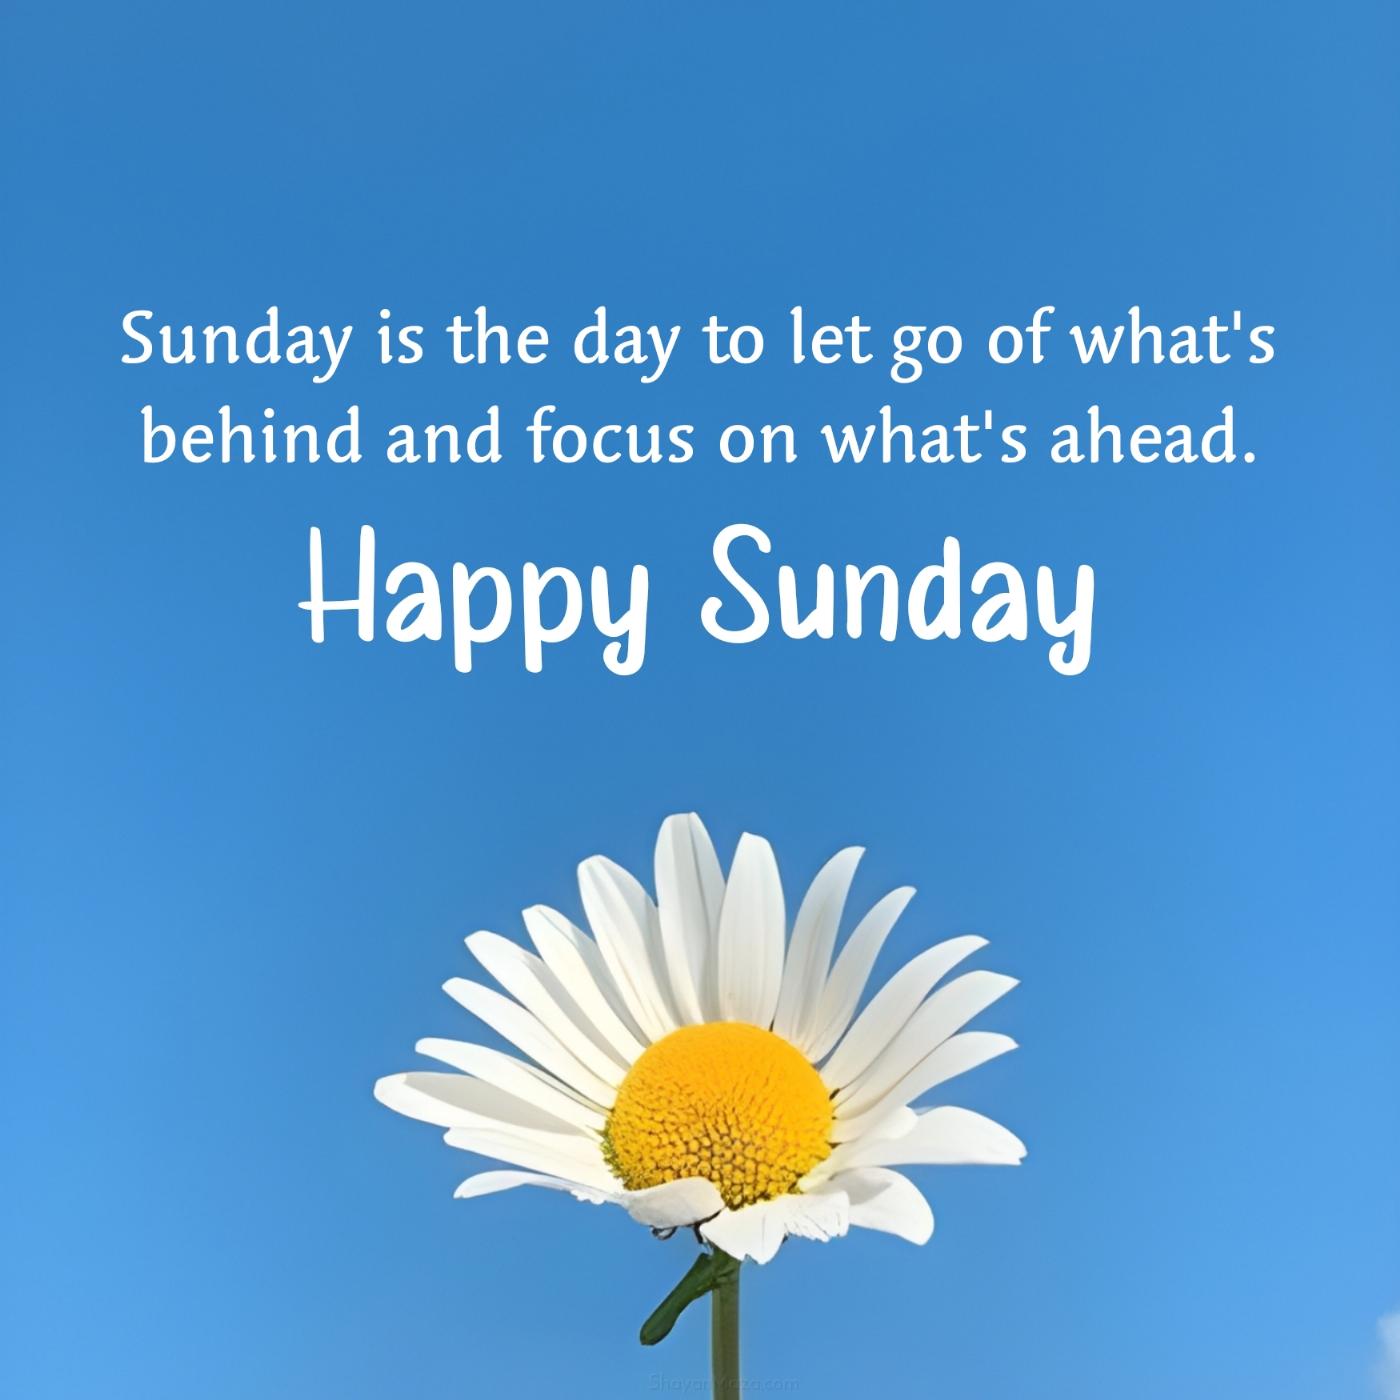 Sunday is the day to let go of what's behind